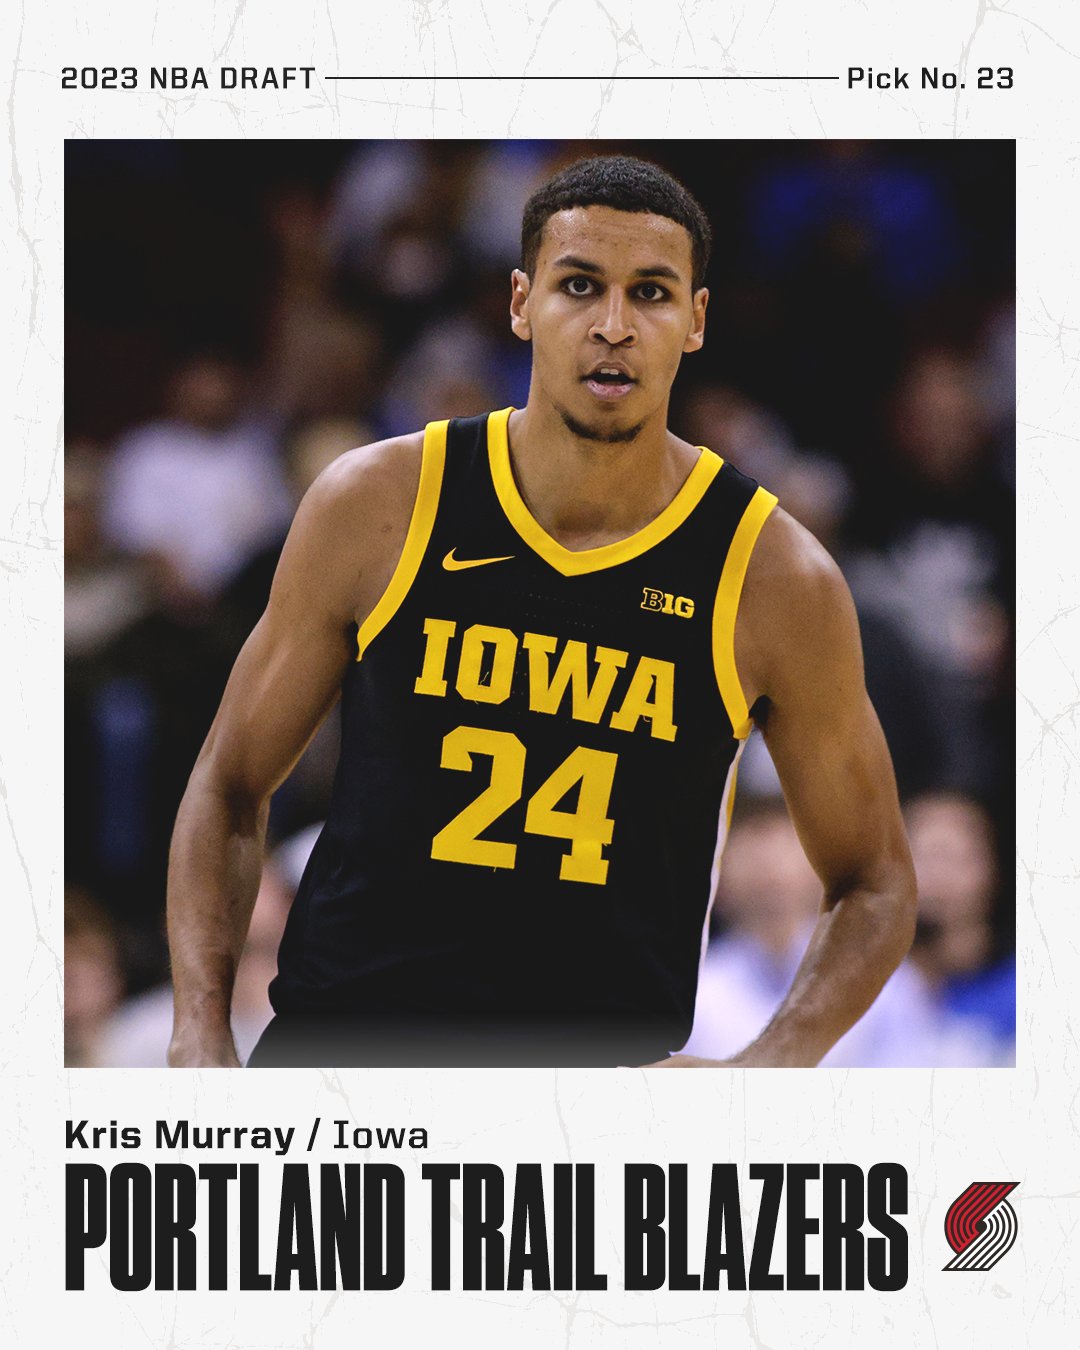 Kris Murray taken by Portland Trail Blazers with 23rd pick in the